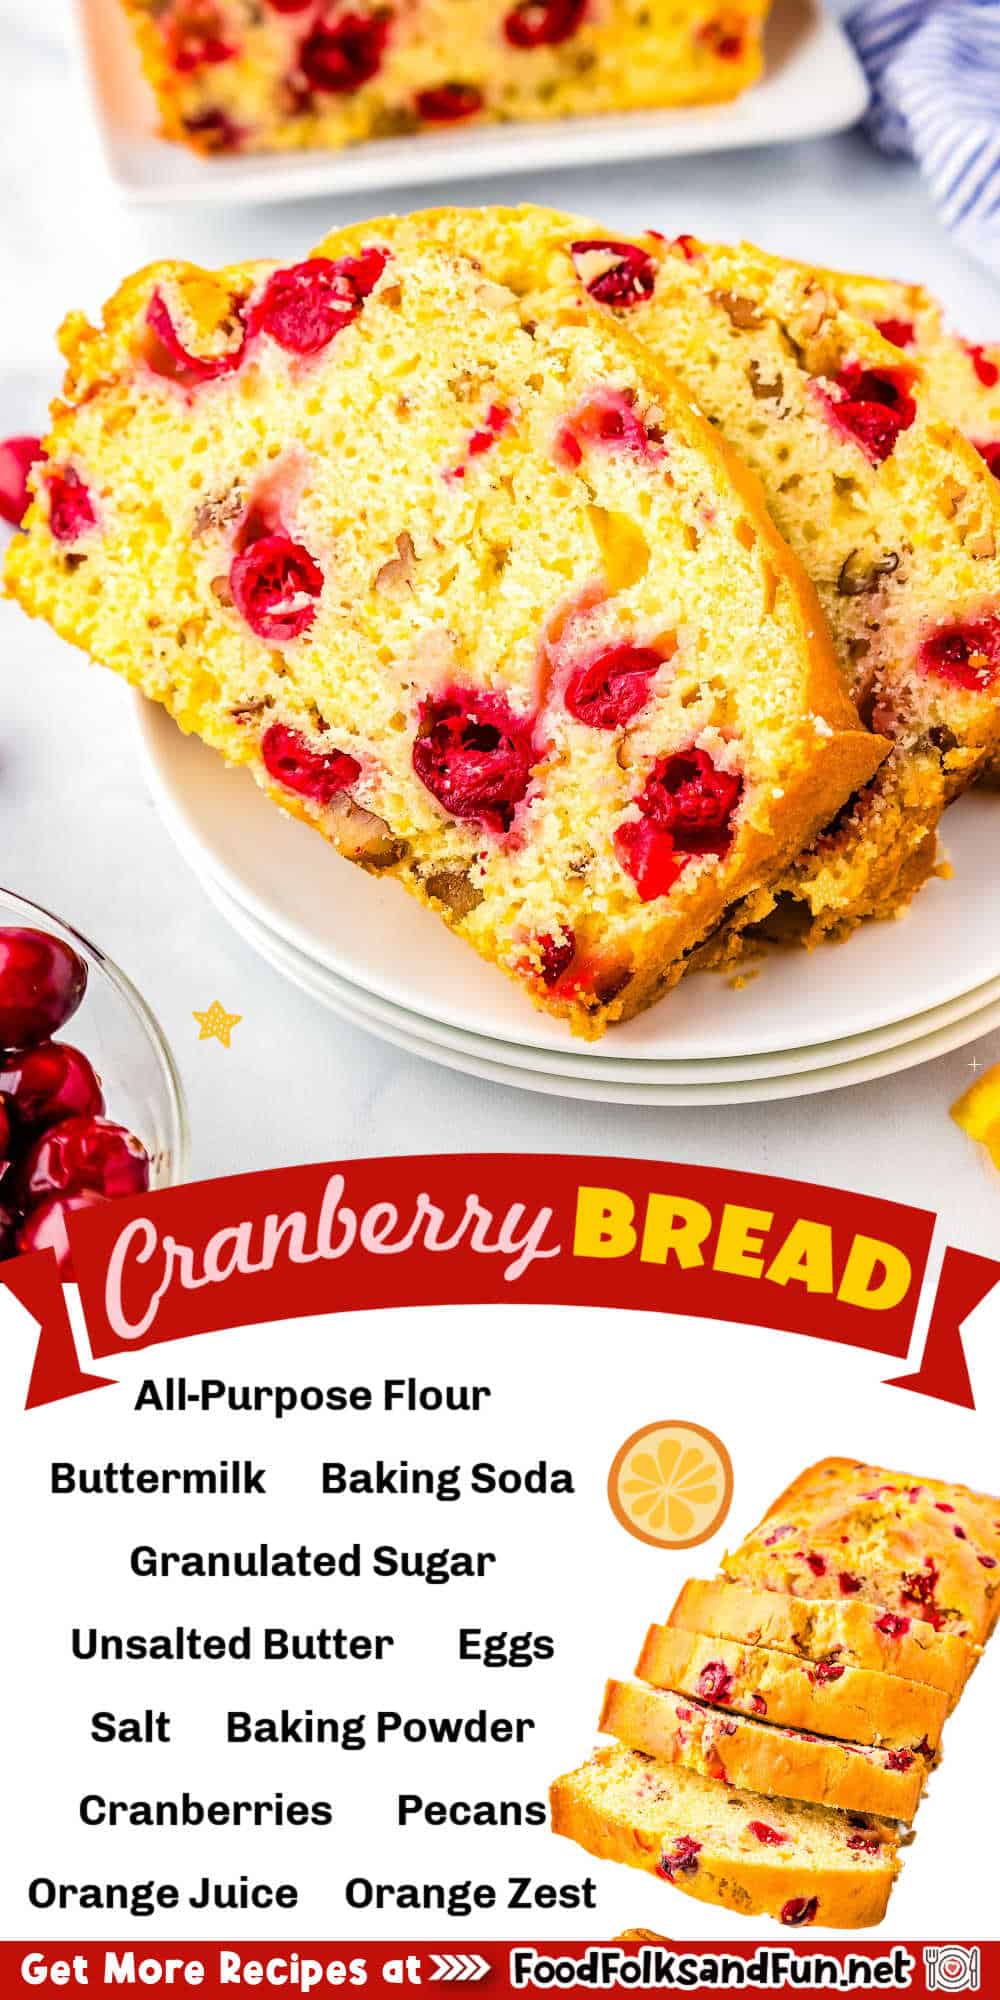 Imagine warm, sweet bread studded with tart cranberries, fragrant orange, and toasted pecans. This Cranberry Bread recipe yields two loaves - share the love or keep it all to yourself! via @foodfolksandfun